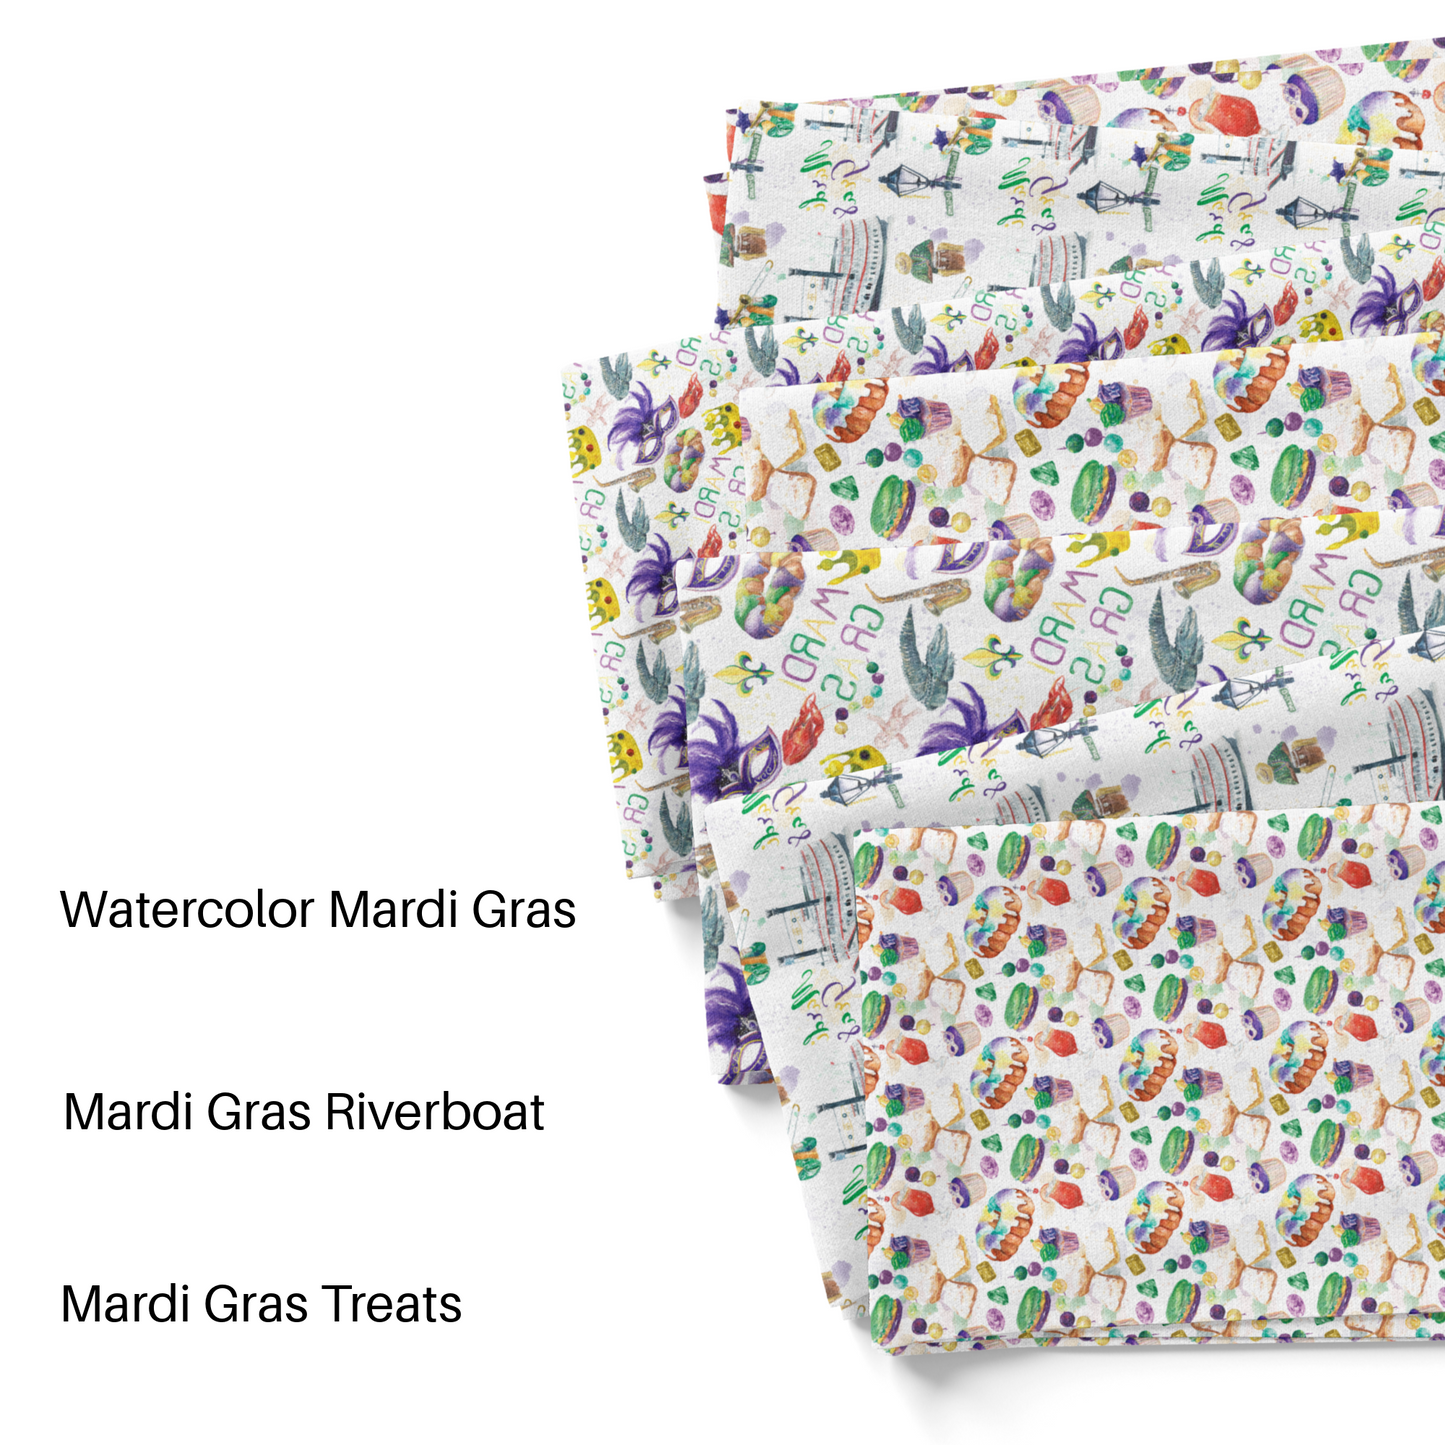 Popular Mardi Gras Snacks and Food on White Fabric by the Yard swatches.